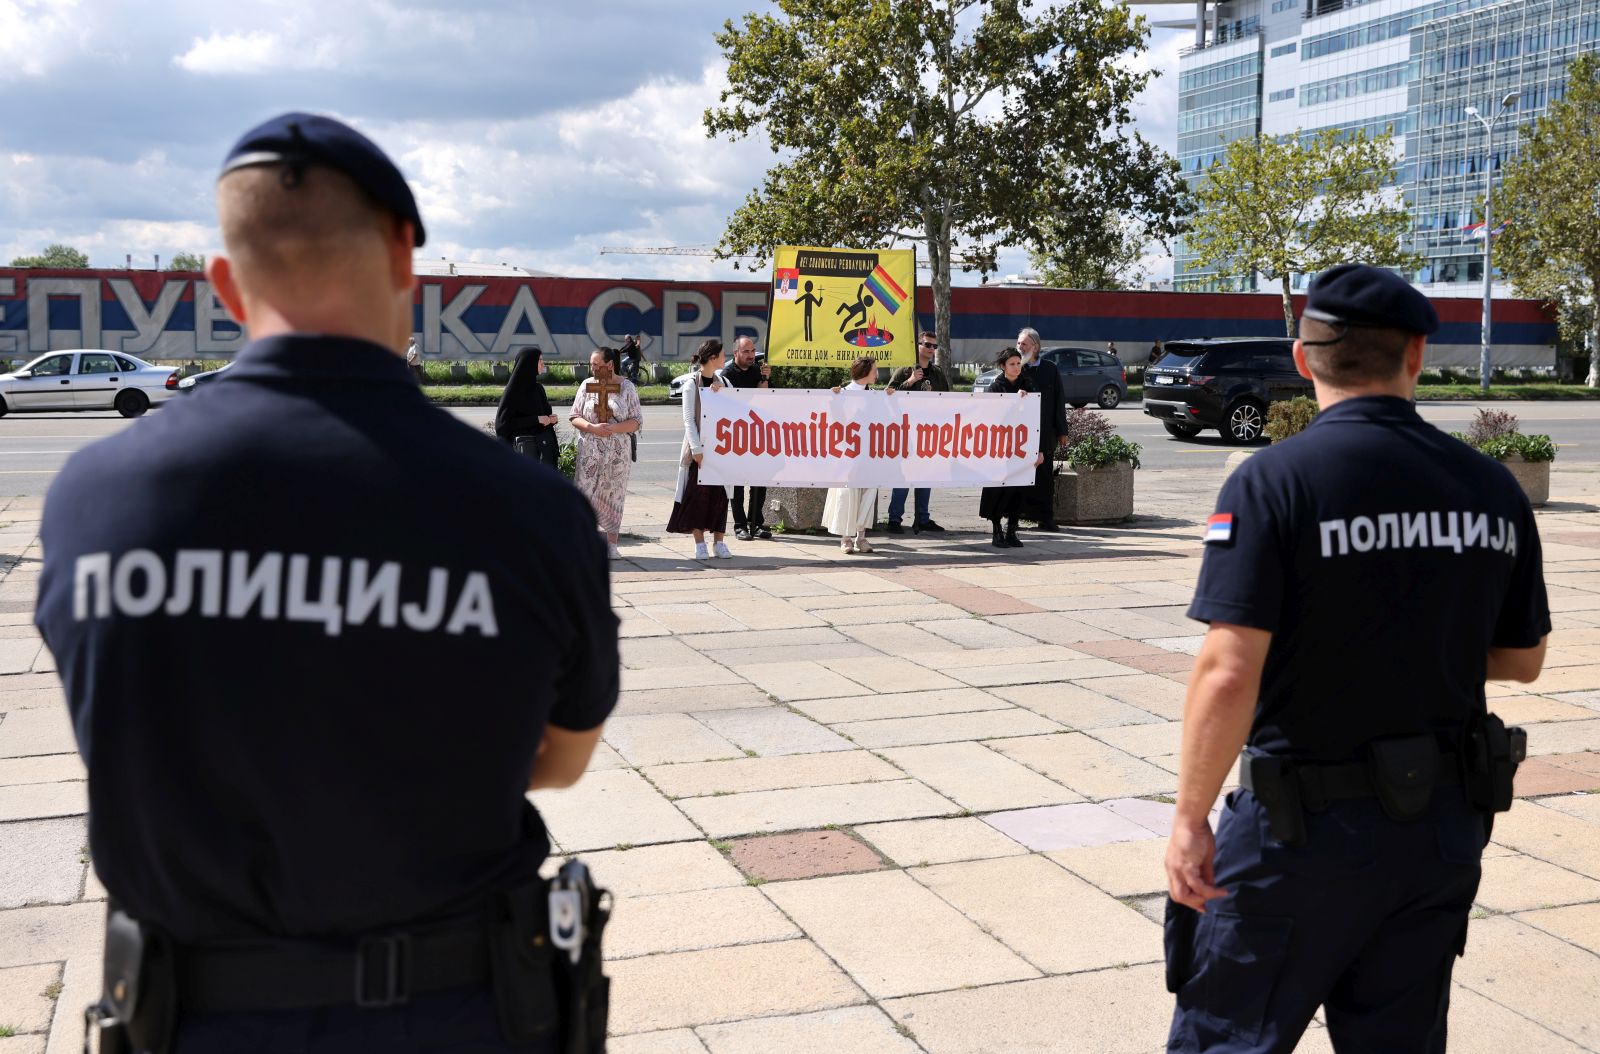 epa10179677 Police officers stand guard as anti-LGBT protestors hold banners during the opening ceremony of the EuroPride 2022 in Belgrade, Serbia, 12 September 2022. EuroPride, a pan-European international event dedicated to LGBTQ pride, is hosted by a different European city each year. Serbia's capital Belgrade is supposed to host the event on the 17 September 2022. But according to country leaders, citing threats from right-wing extremist groups and fears of clashes, the final decision on whether the event will be held has not been confirmed.  EPA/ANDREJ CUKIC